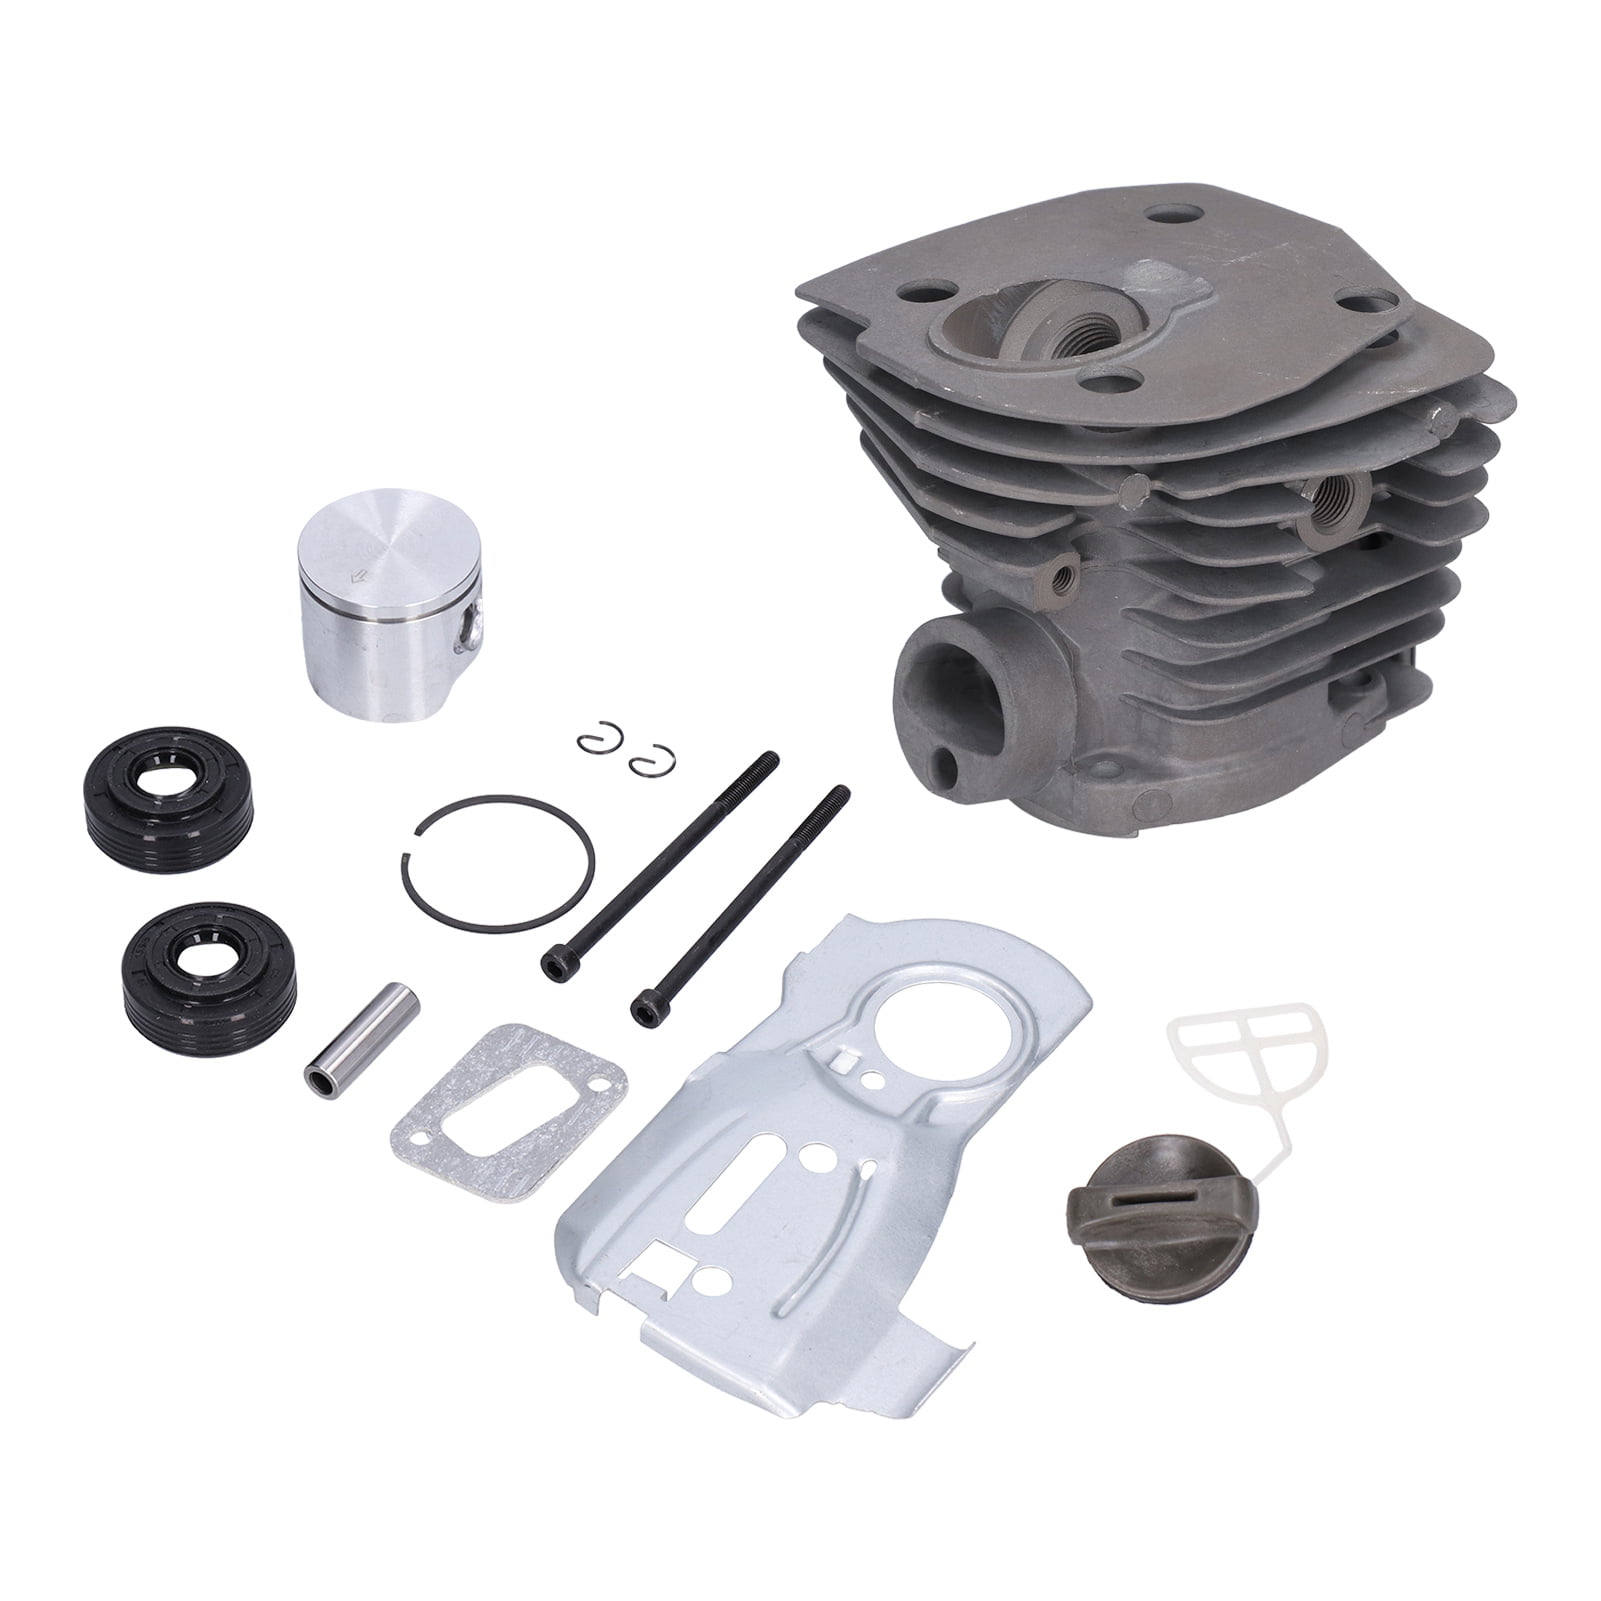 Zerodis 44mm Cylinder Piston Oil Top End Rebuild Kit 503869971 Replacement  For 340 345 350 Chain Saw,503932302